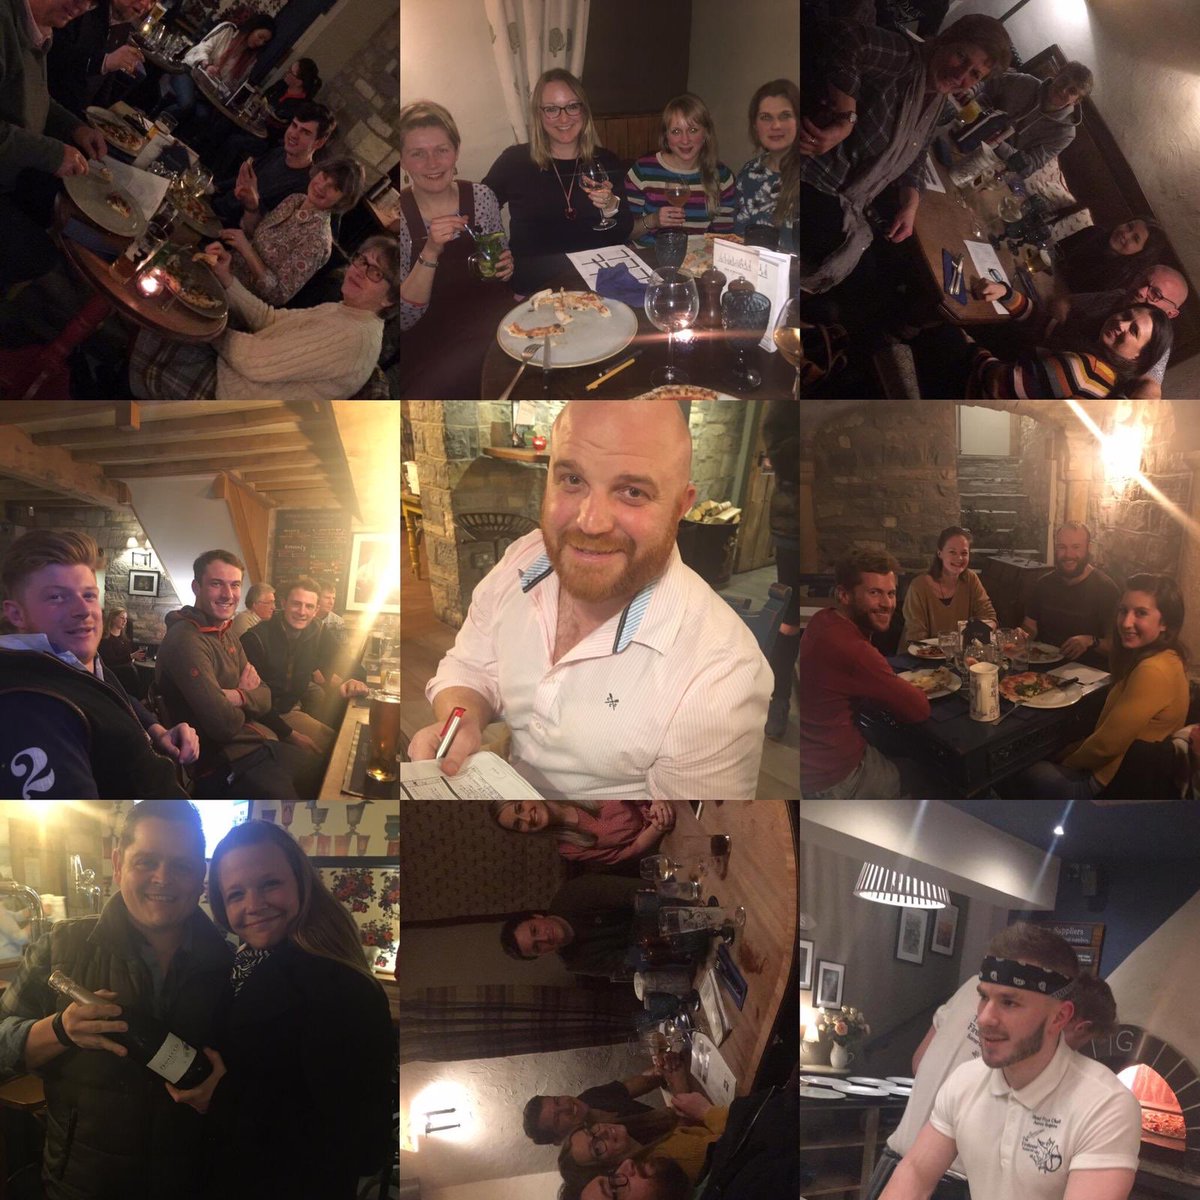 Well done to all who participated in the Quizza! Fab evening. See you all again for Sunday 3rd March #pubquiz #quizza #sundaynight #fun #teamgame